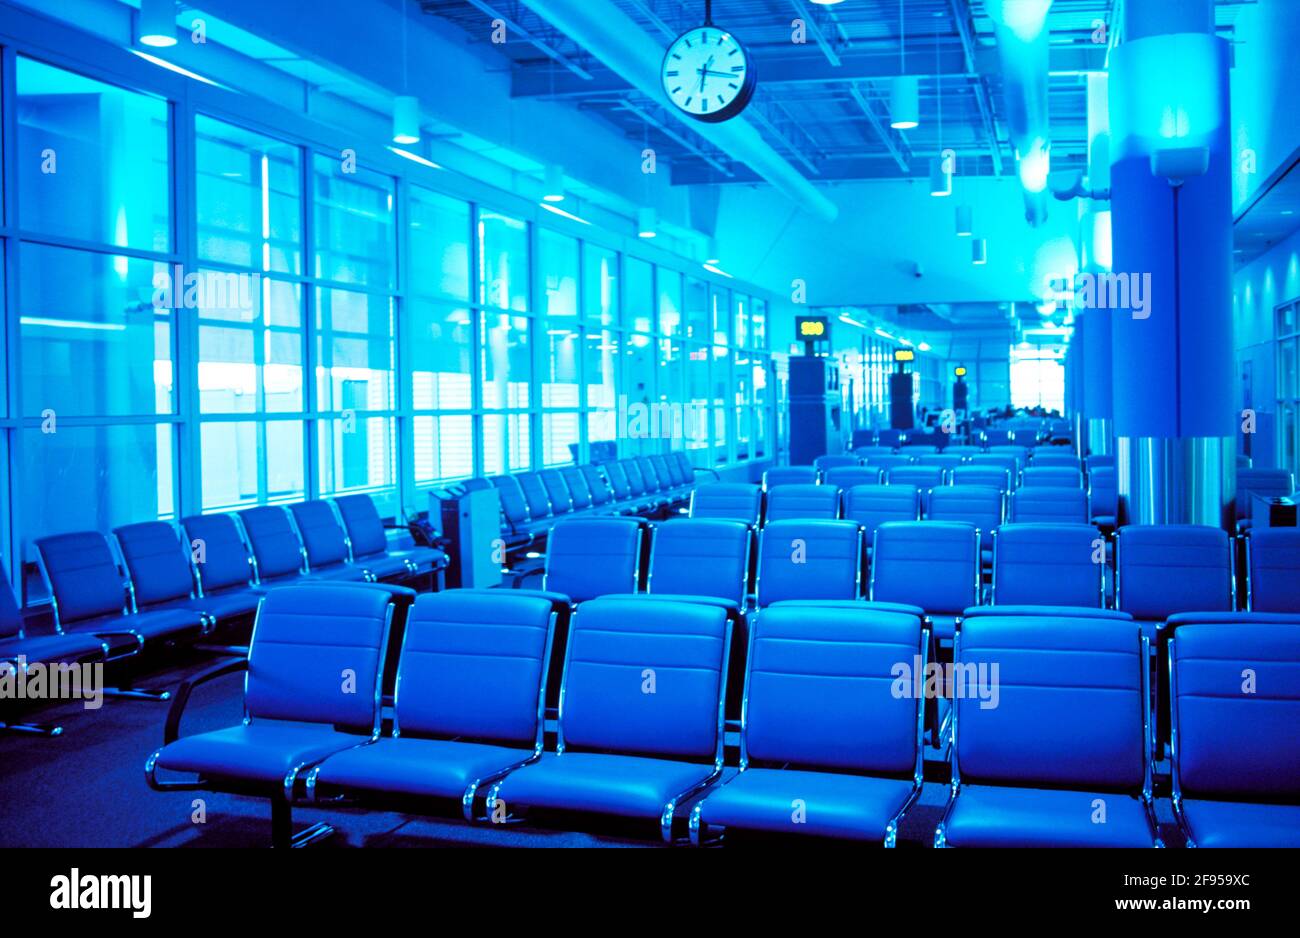 Canada, Ontario, Toronto. Pearson International Airport. Airport lounge with empty seats and clock. Stock Photo